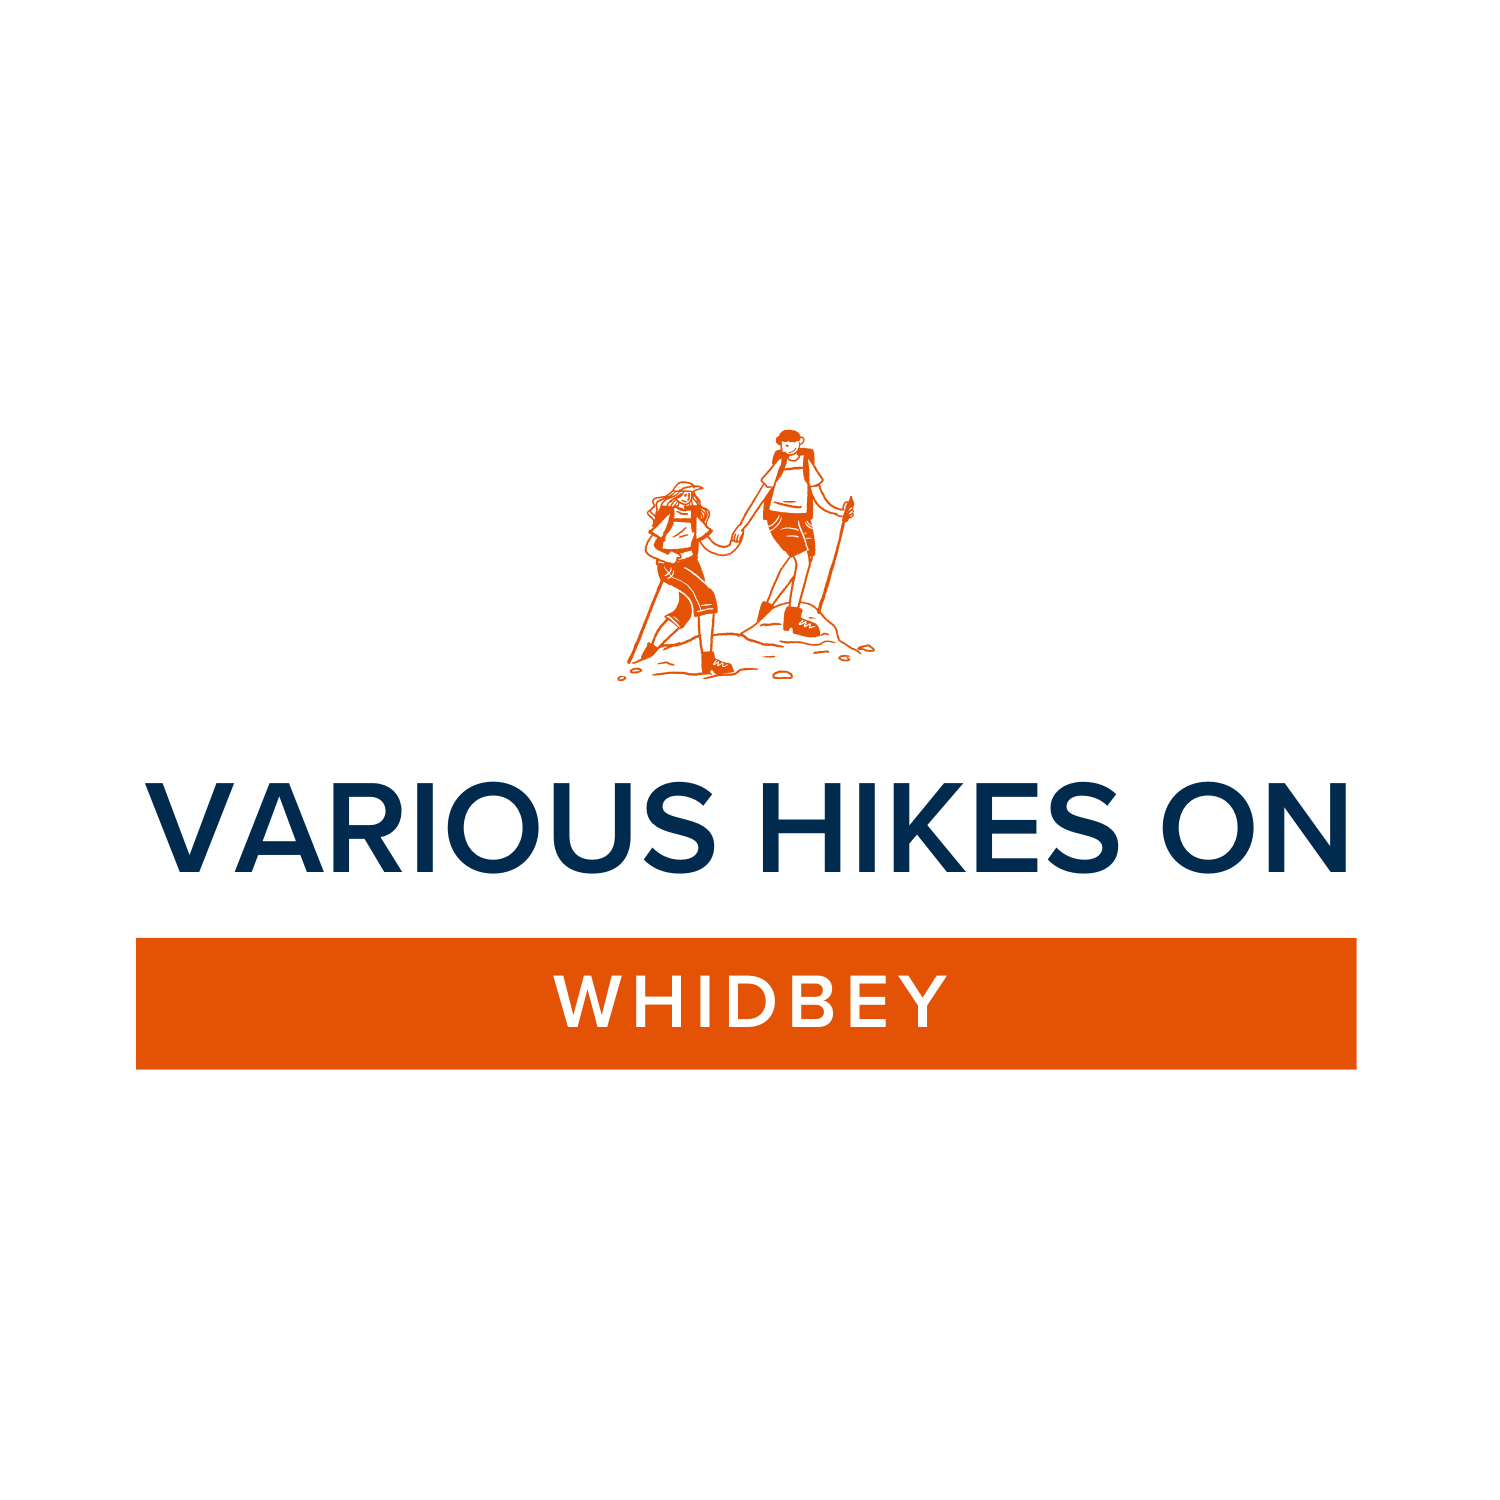 Various Hikes on Whidbey, PNW, Get outdoors, PNW vibes, adventure, blog, Whidbey Island Guide